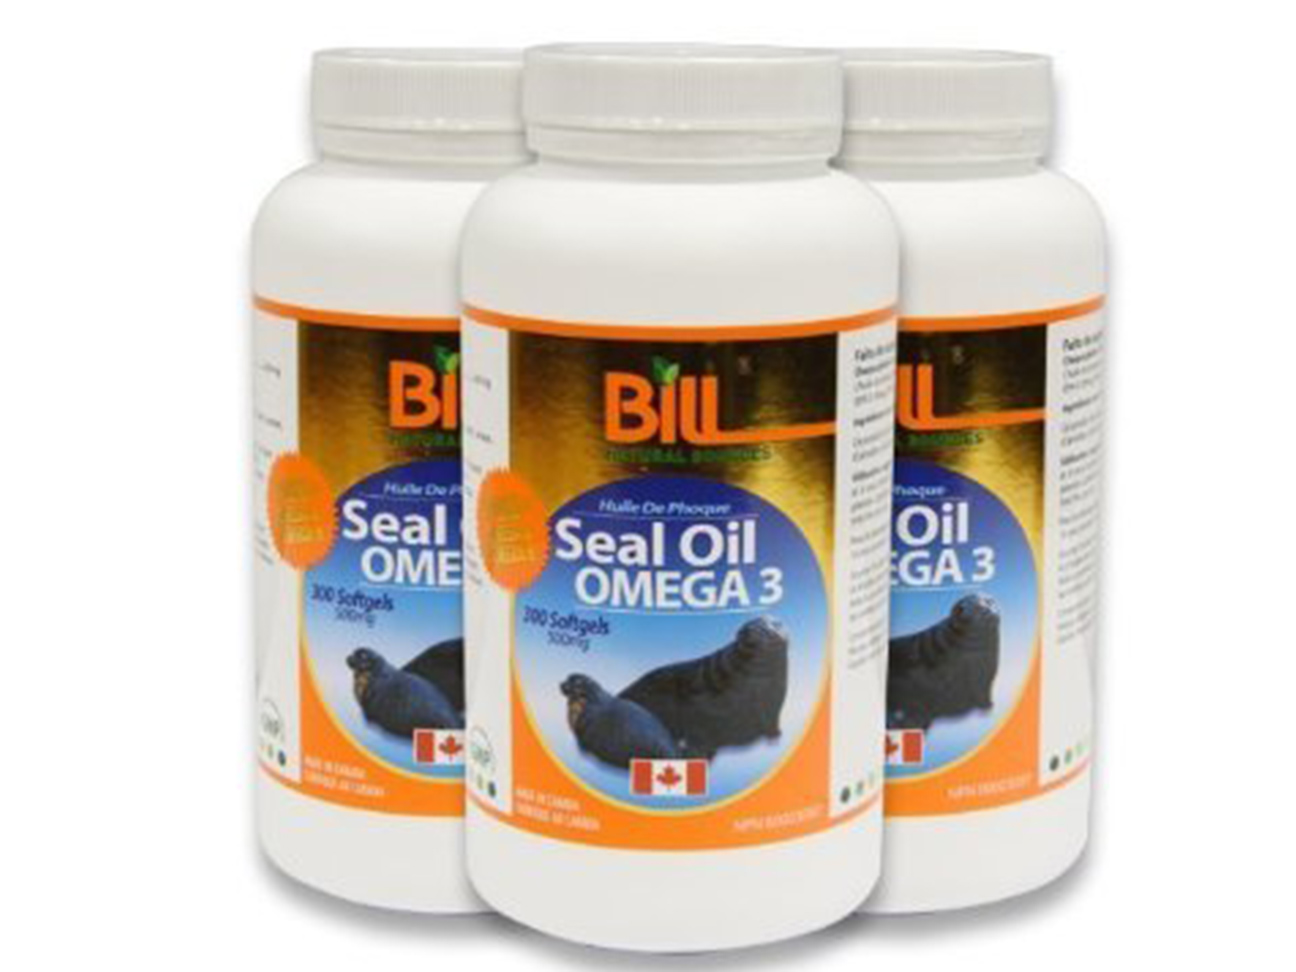 Seal Oil Supplements